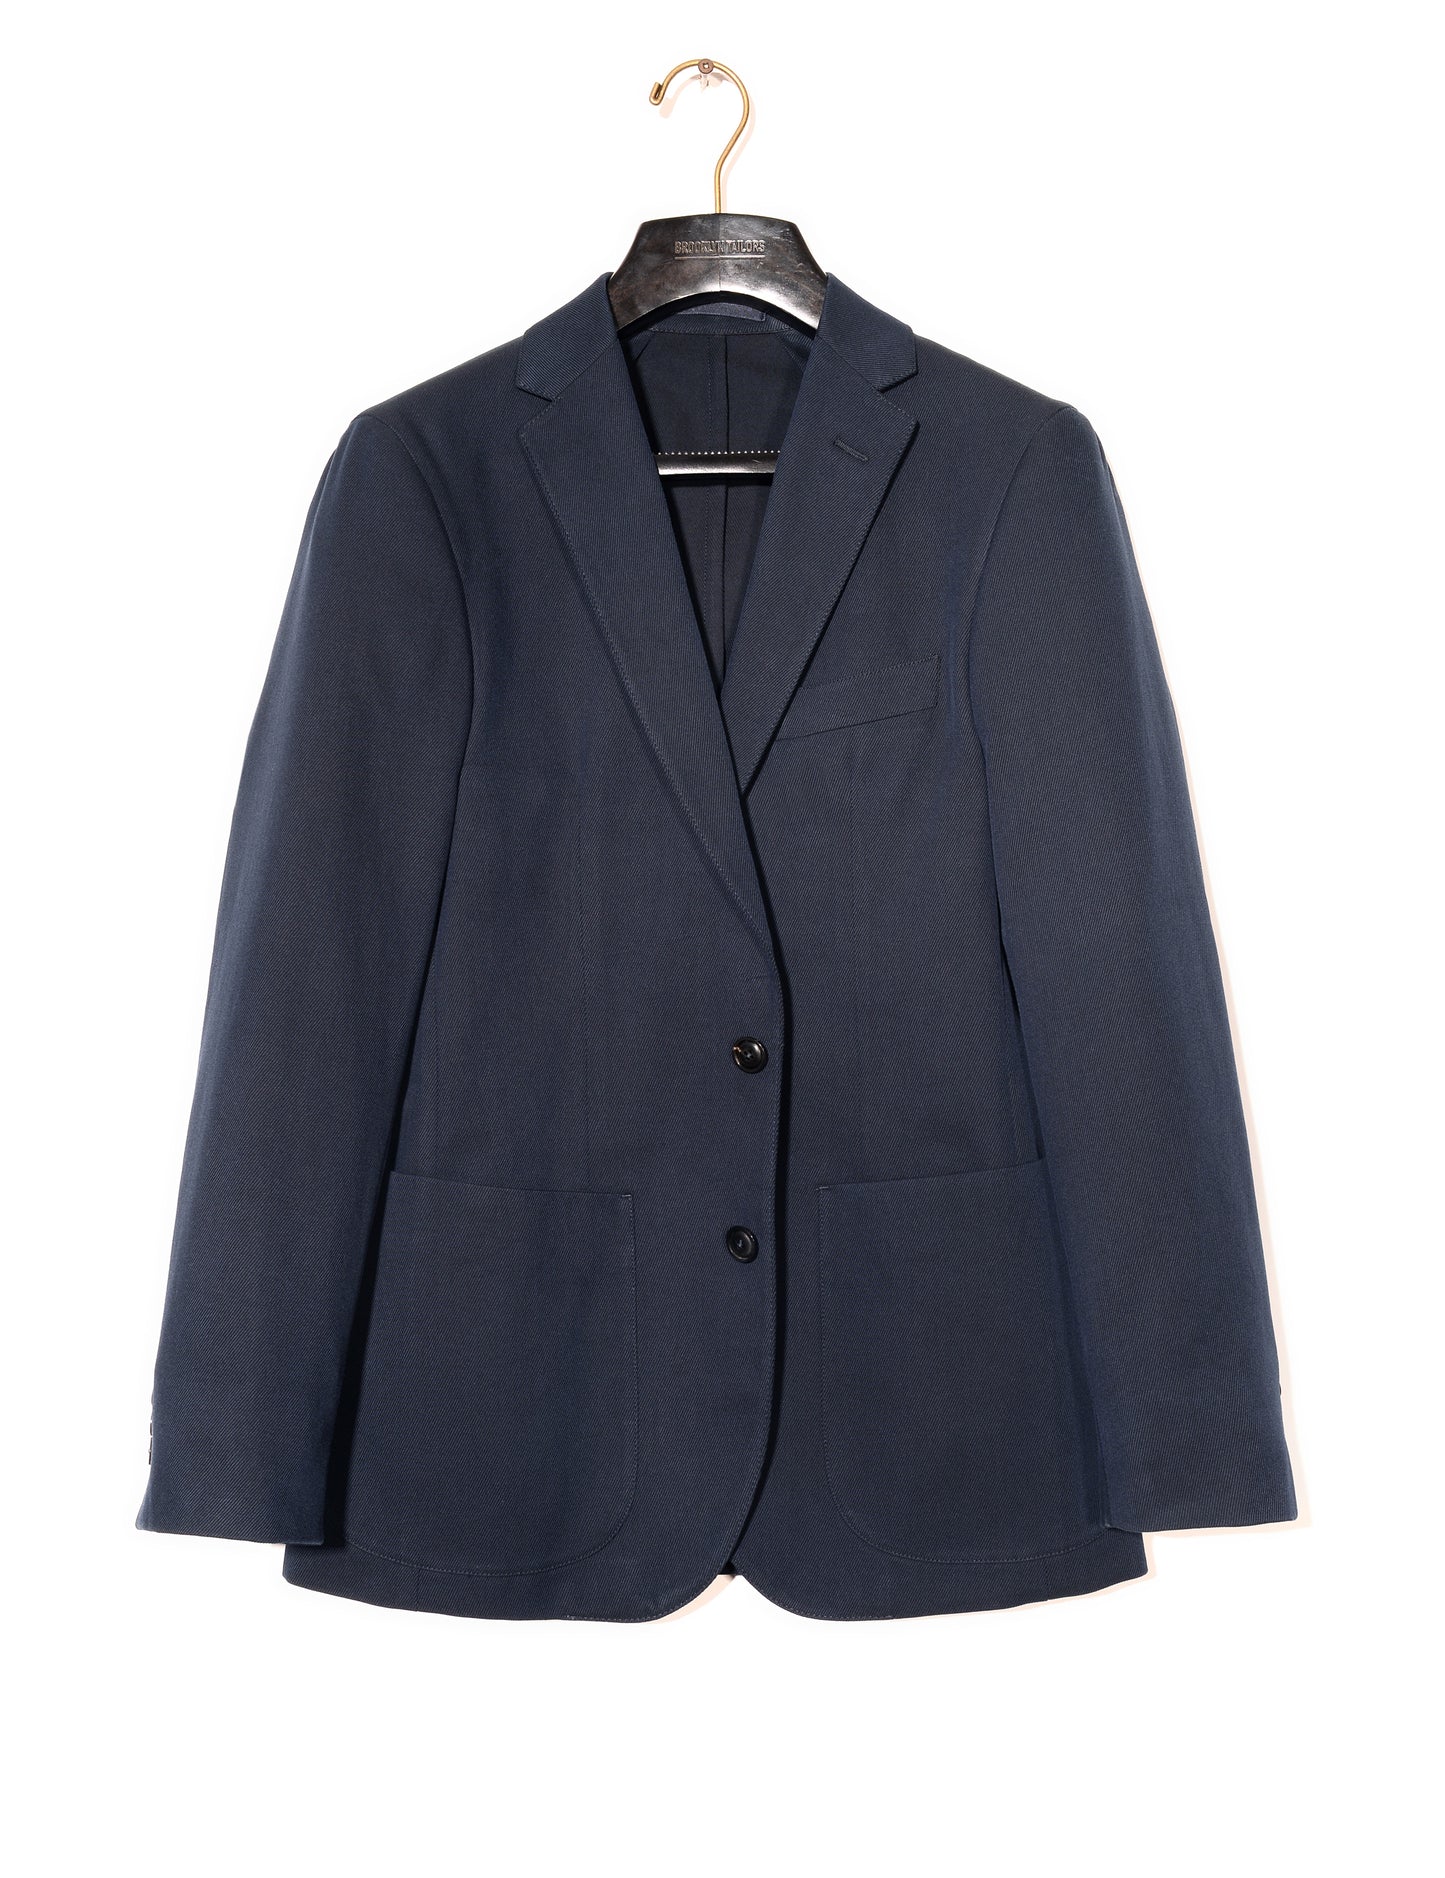 BKT35 Unstructured Jacket in Cavalry Twill - Navy – Brooklyn Tailors